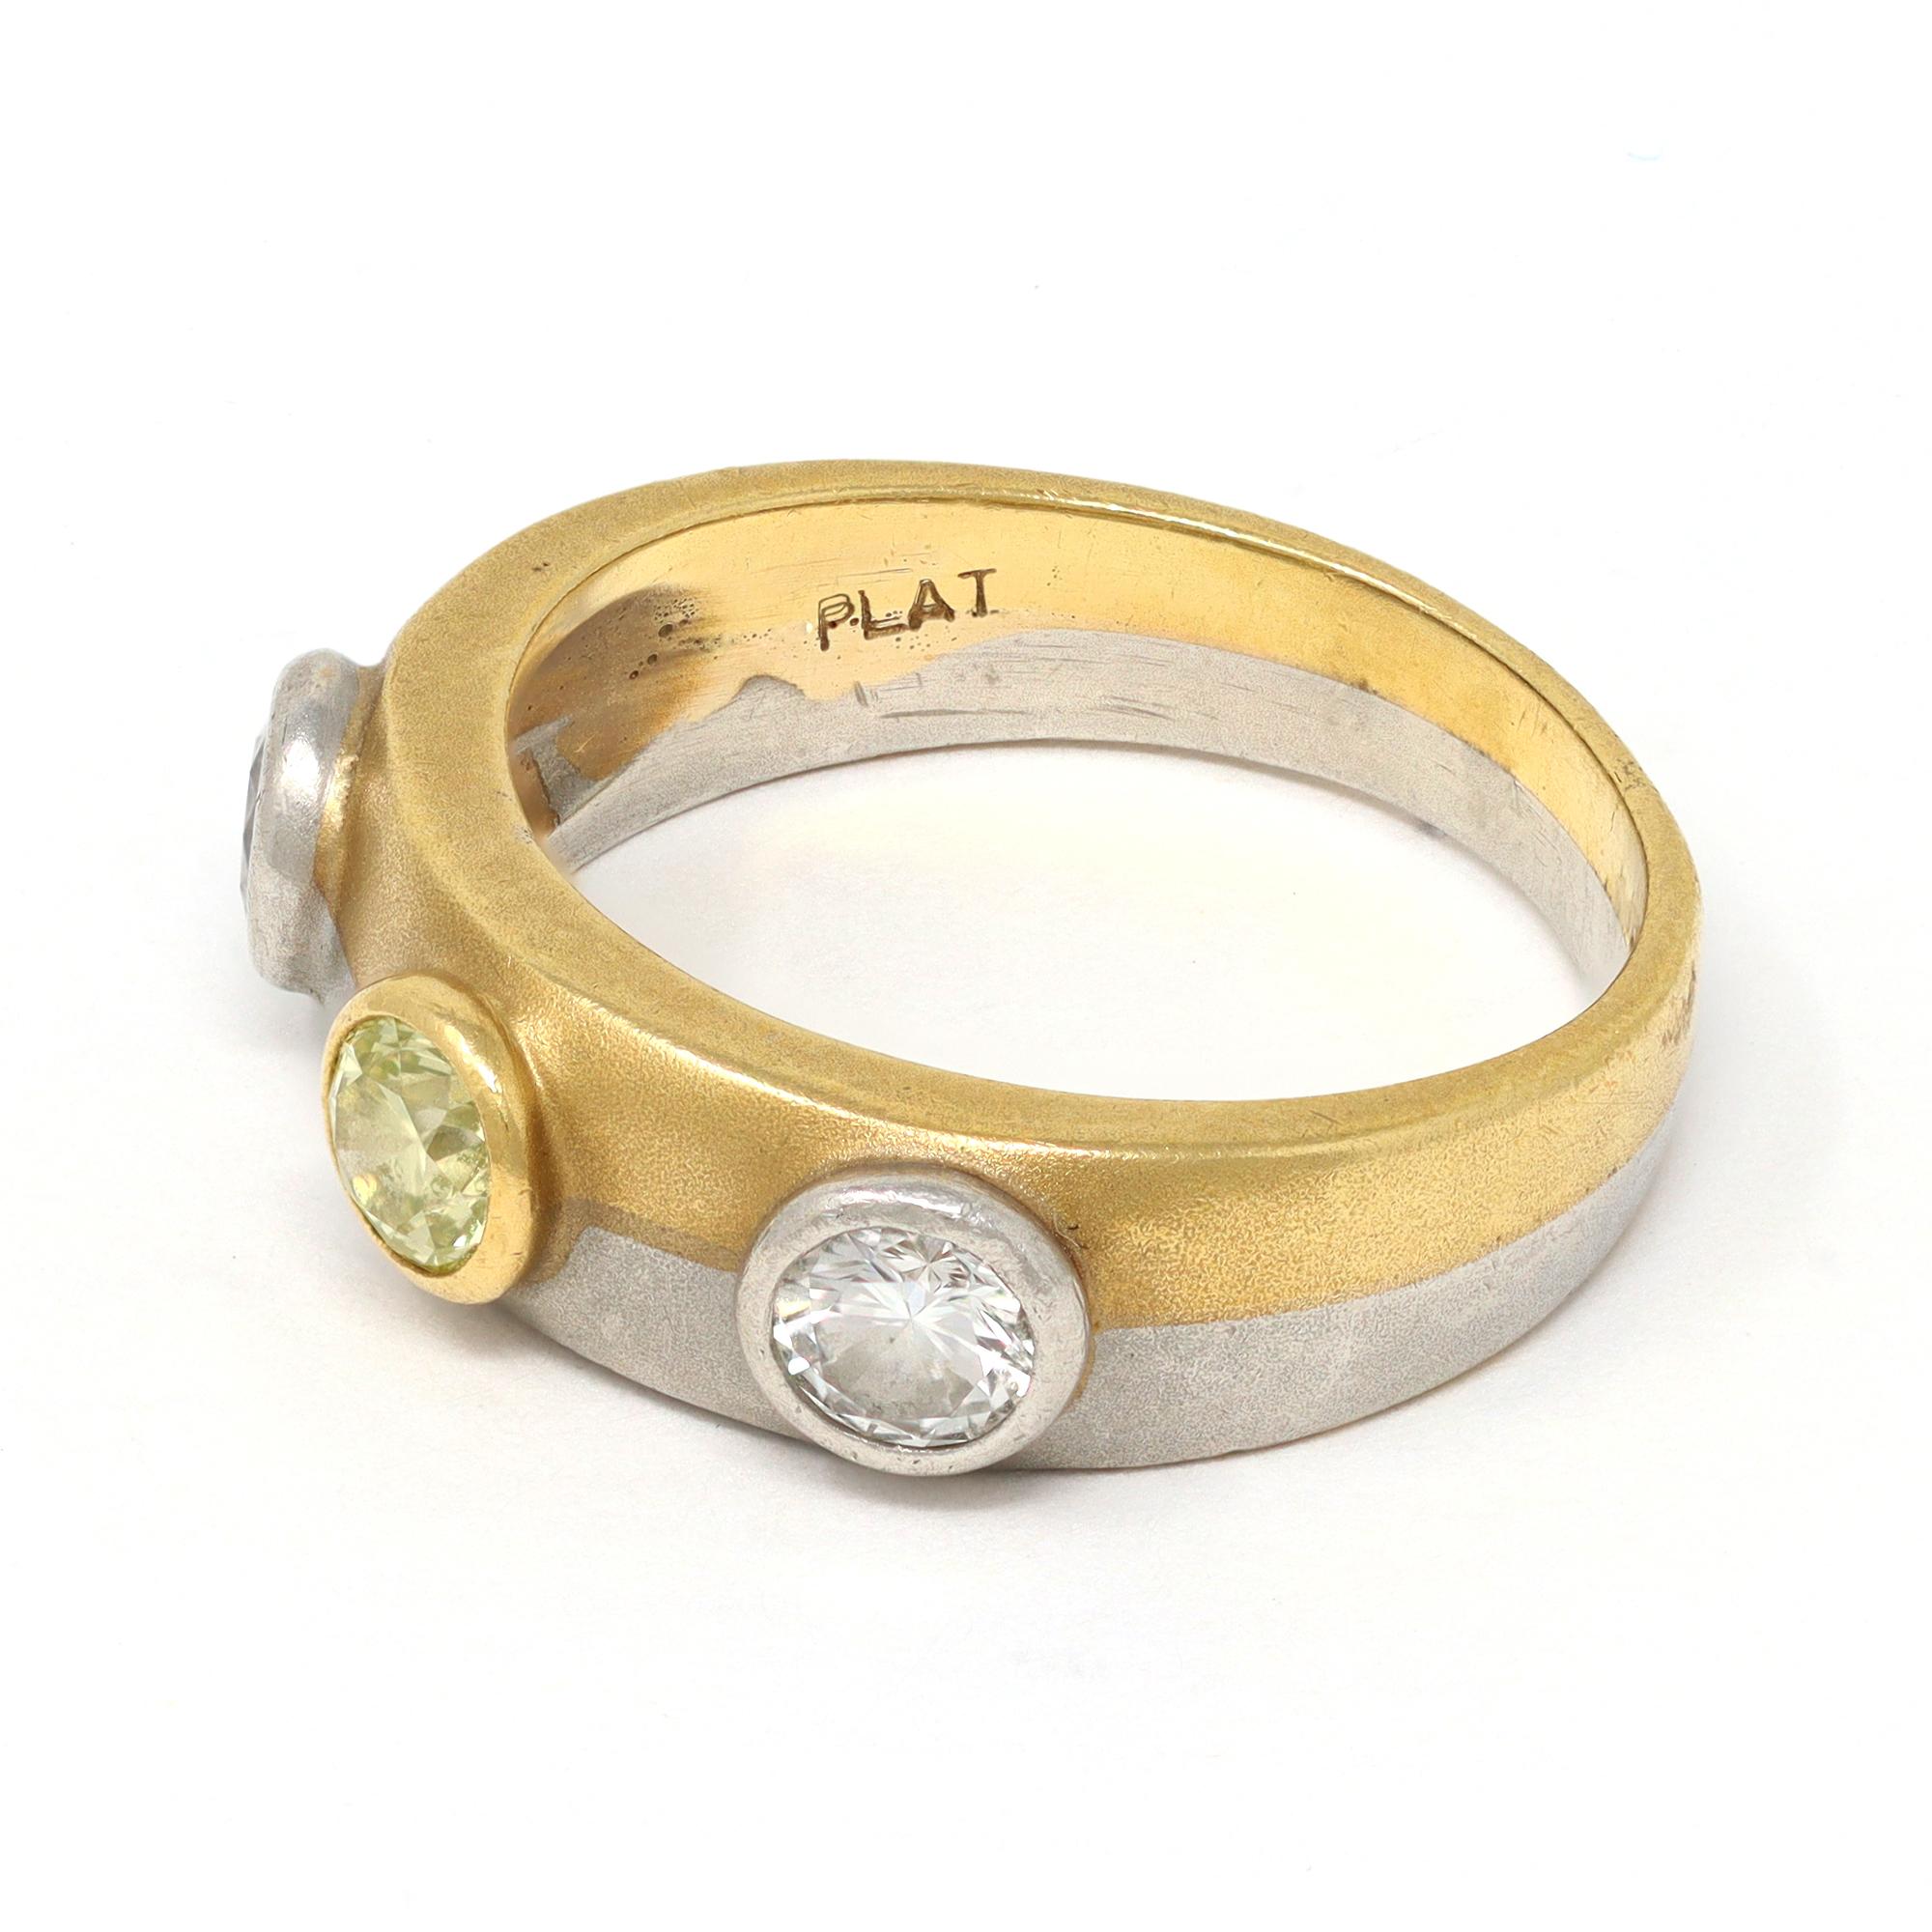 A 18 karat gold and platinum, white and fancy yellow diamonds band ring, designed as a platinum and yellow gold band fused together bezel-set at the front with 2 round white diamonds GH color VS clarity and 1 round fancy yellow diamond with a total